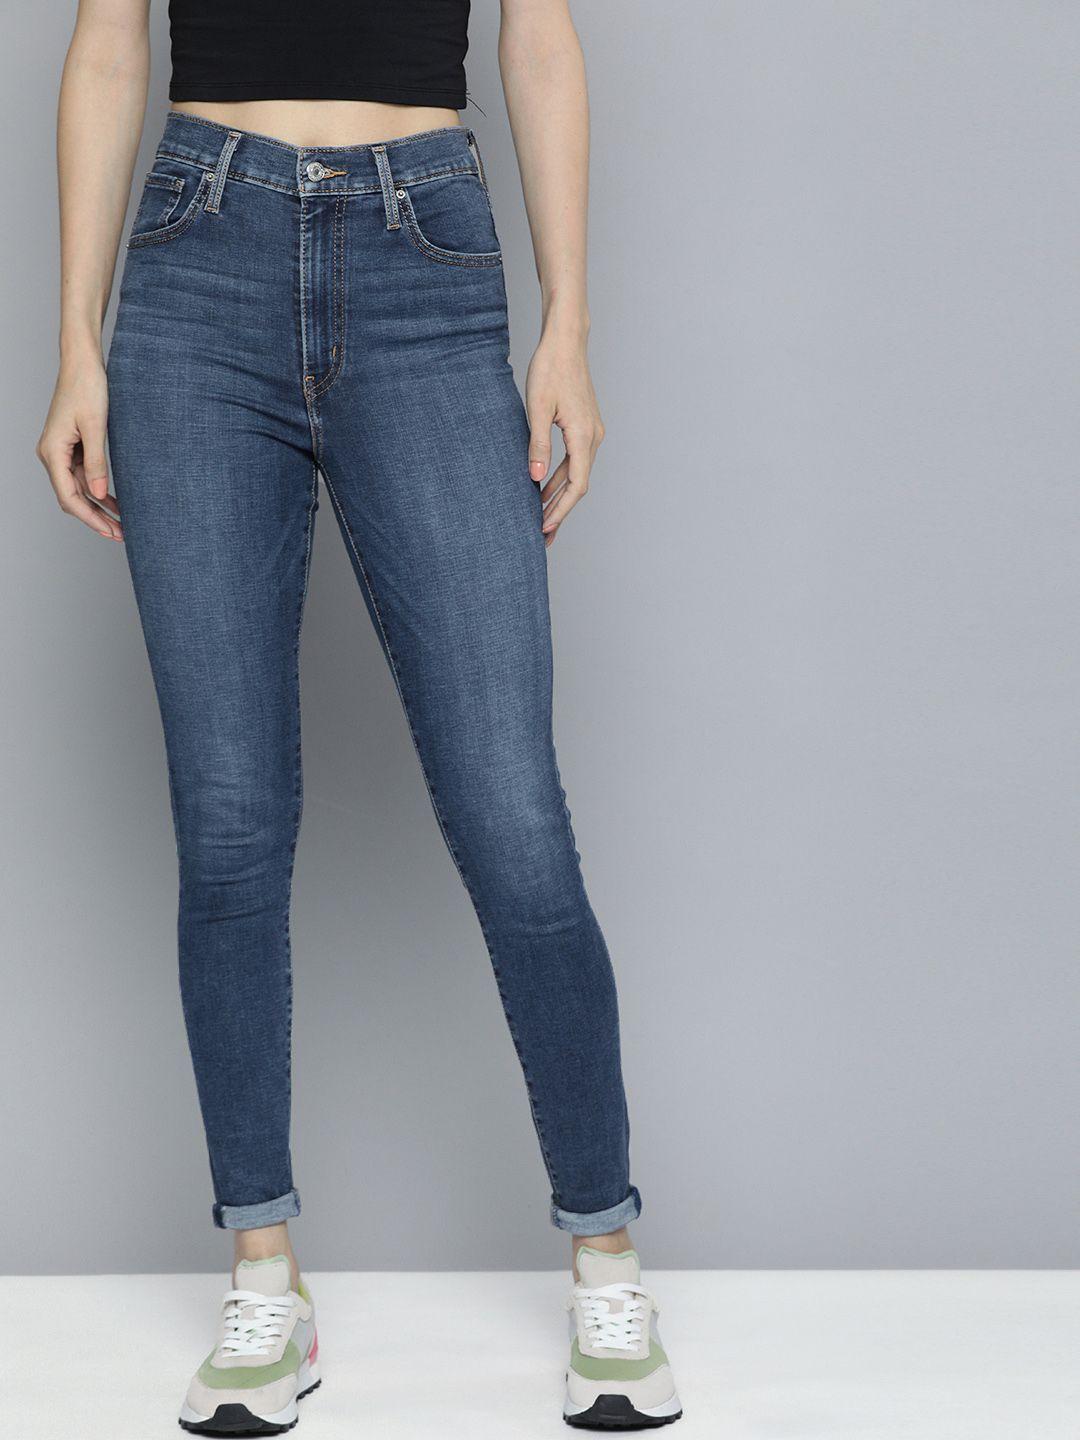 levis-women-blue-skinny-fit-high-rise-light-fade-stretchable-jeans